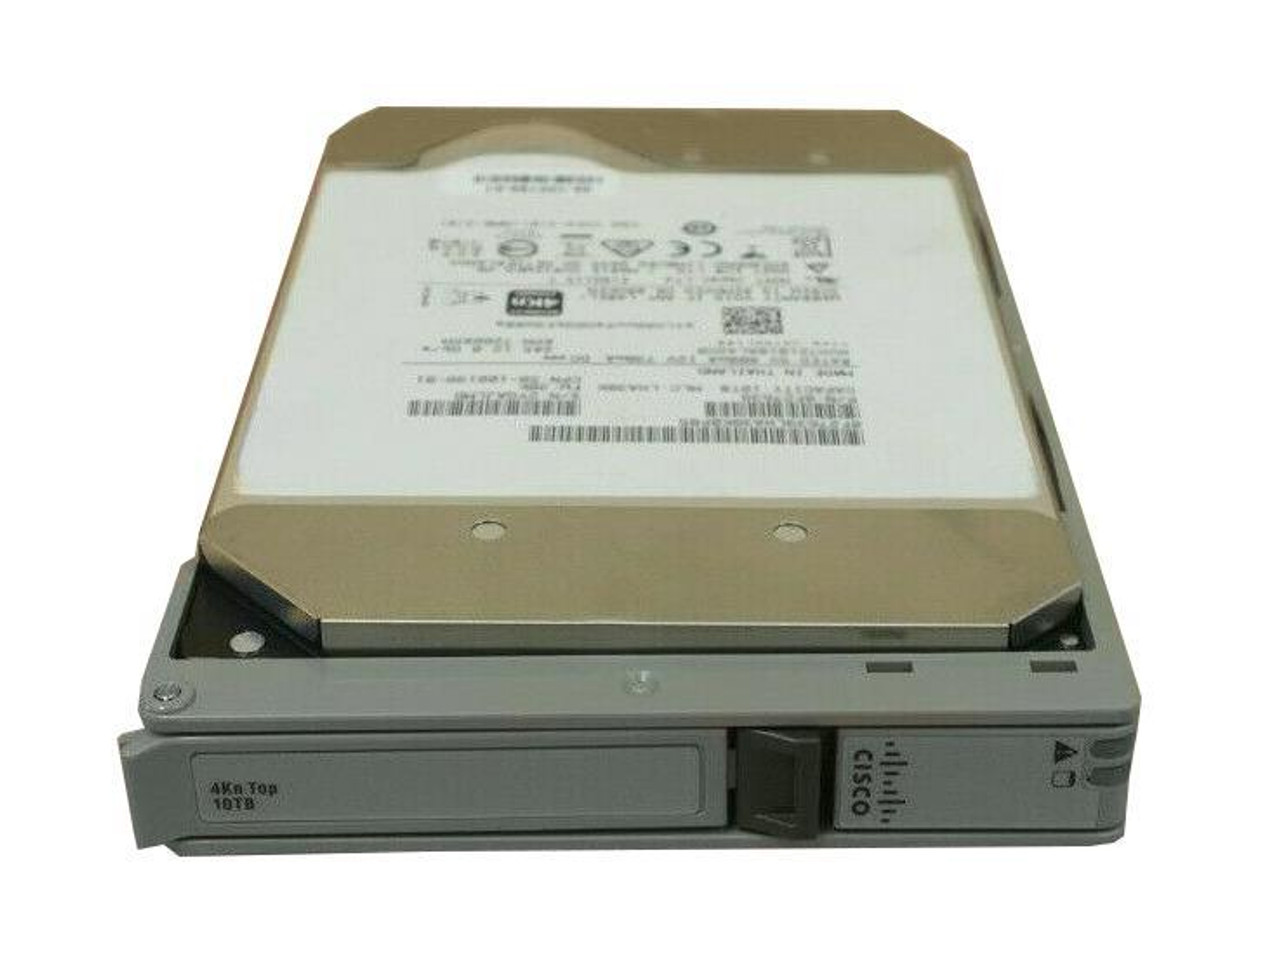 Cisco 10TB 7200RPM SAS 12Gbps (4K) 3.5-inch Internal Hard Drive with Carrier Top Load